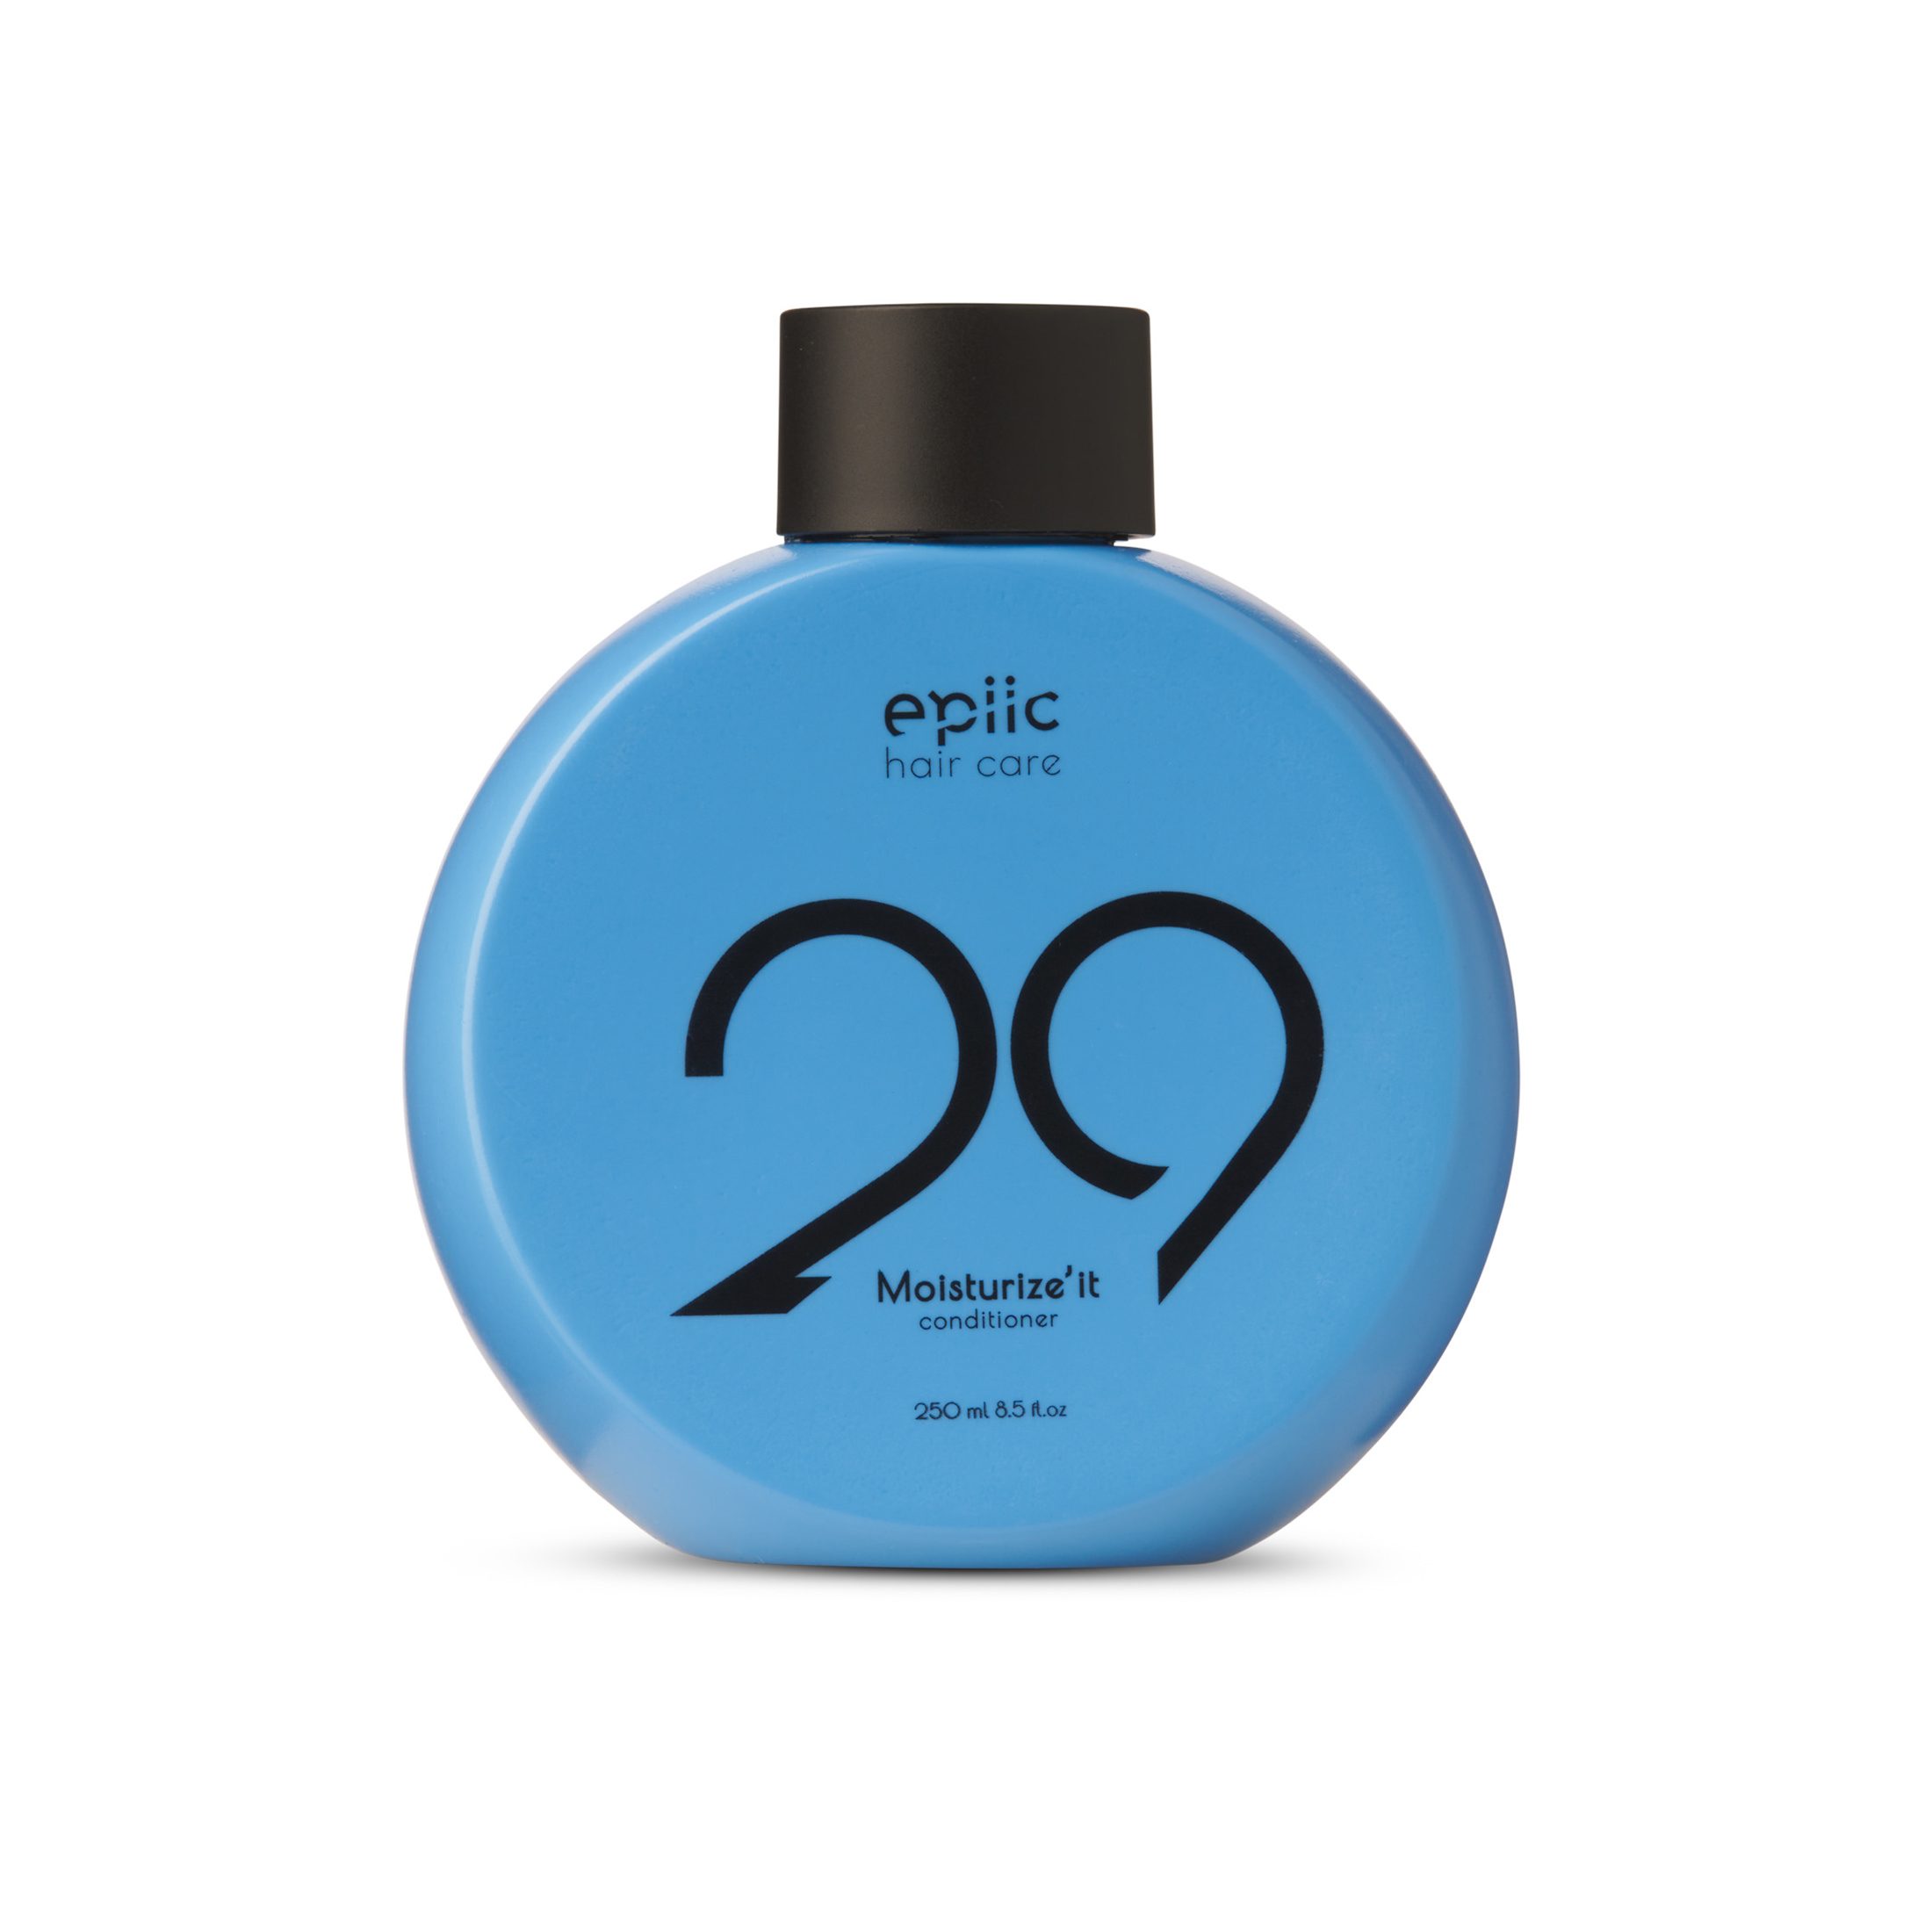 epiic hair care nr. 29 Moisturize’it conditioner ECOCERT® 250ml